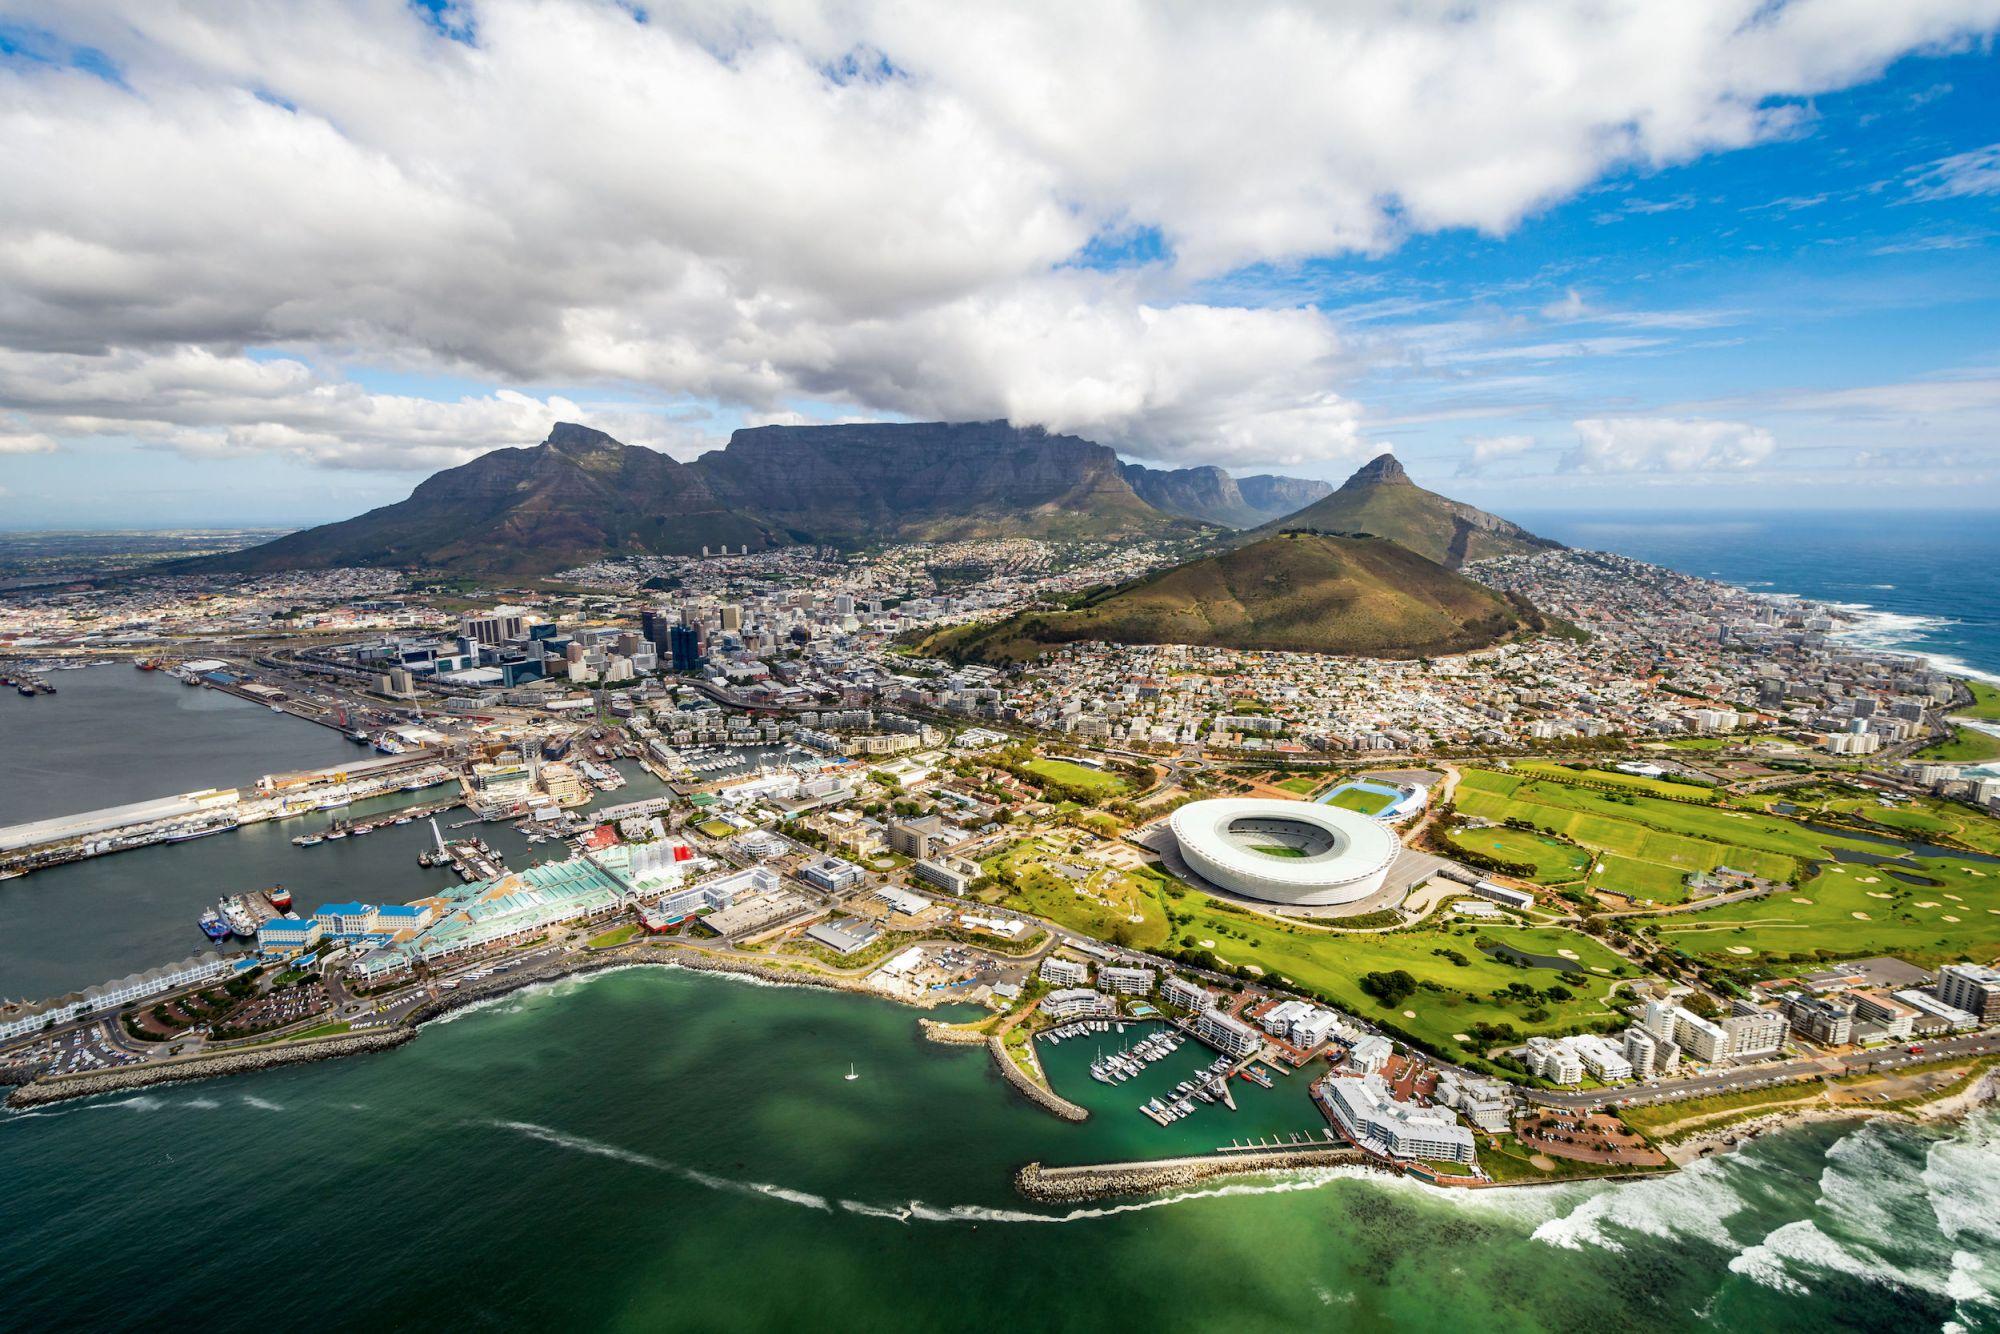 South Africa: 7 things to see and do in Cape Town